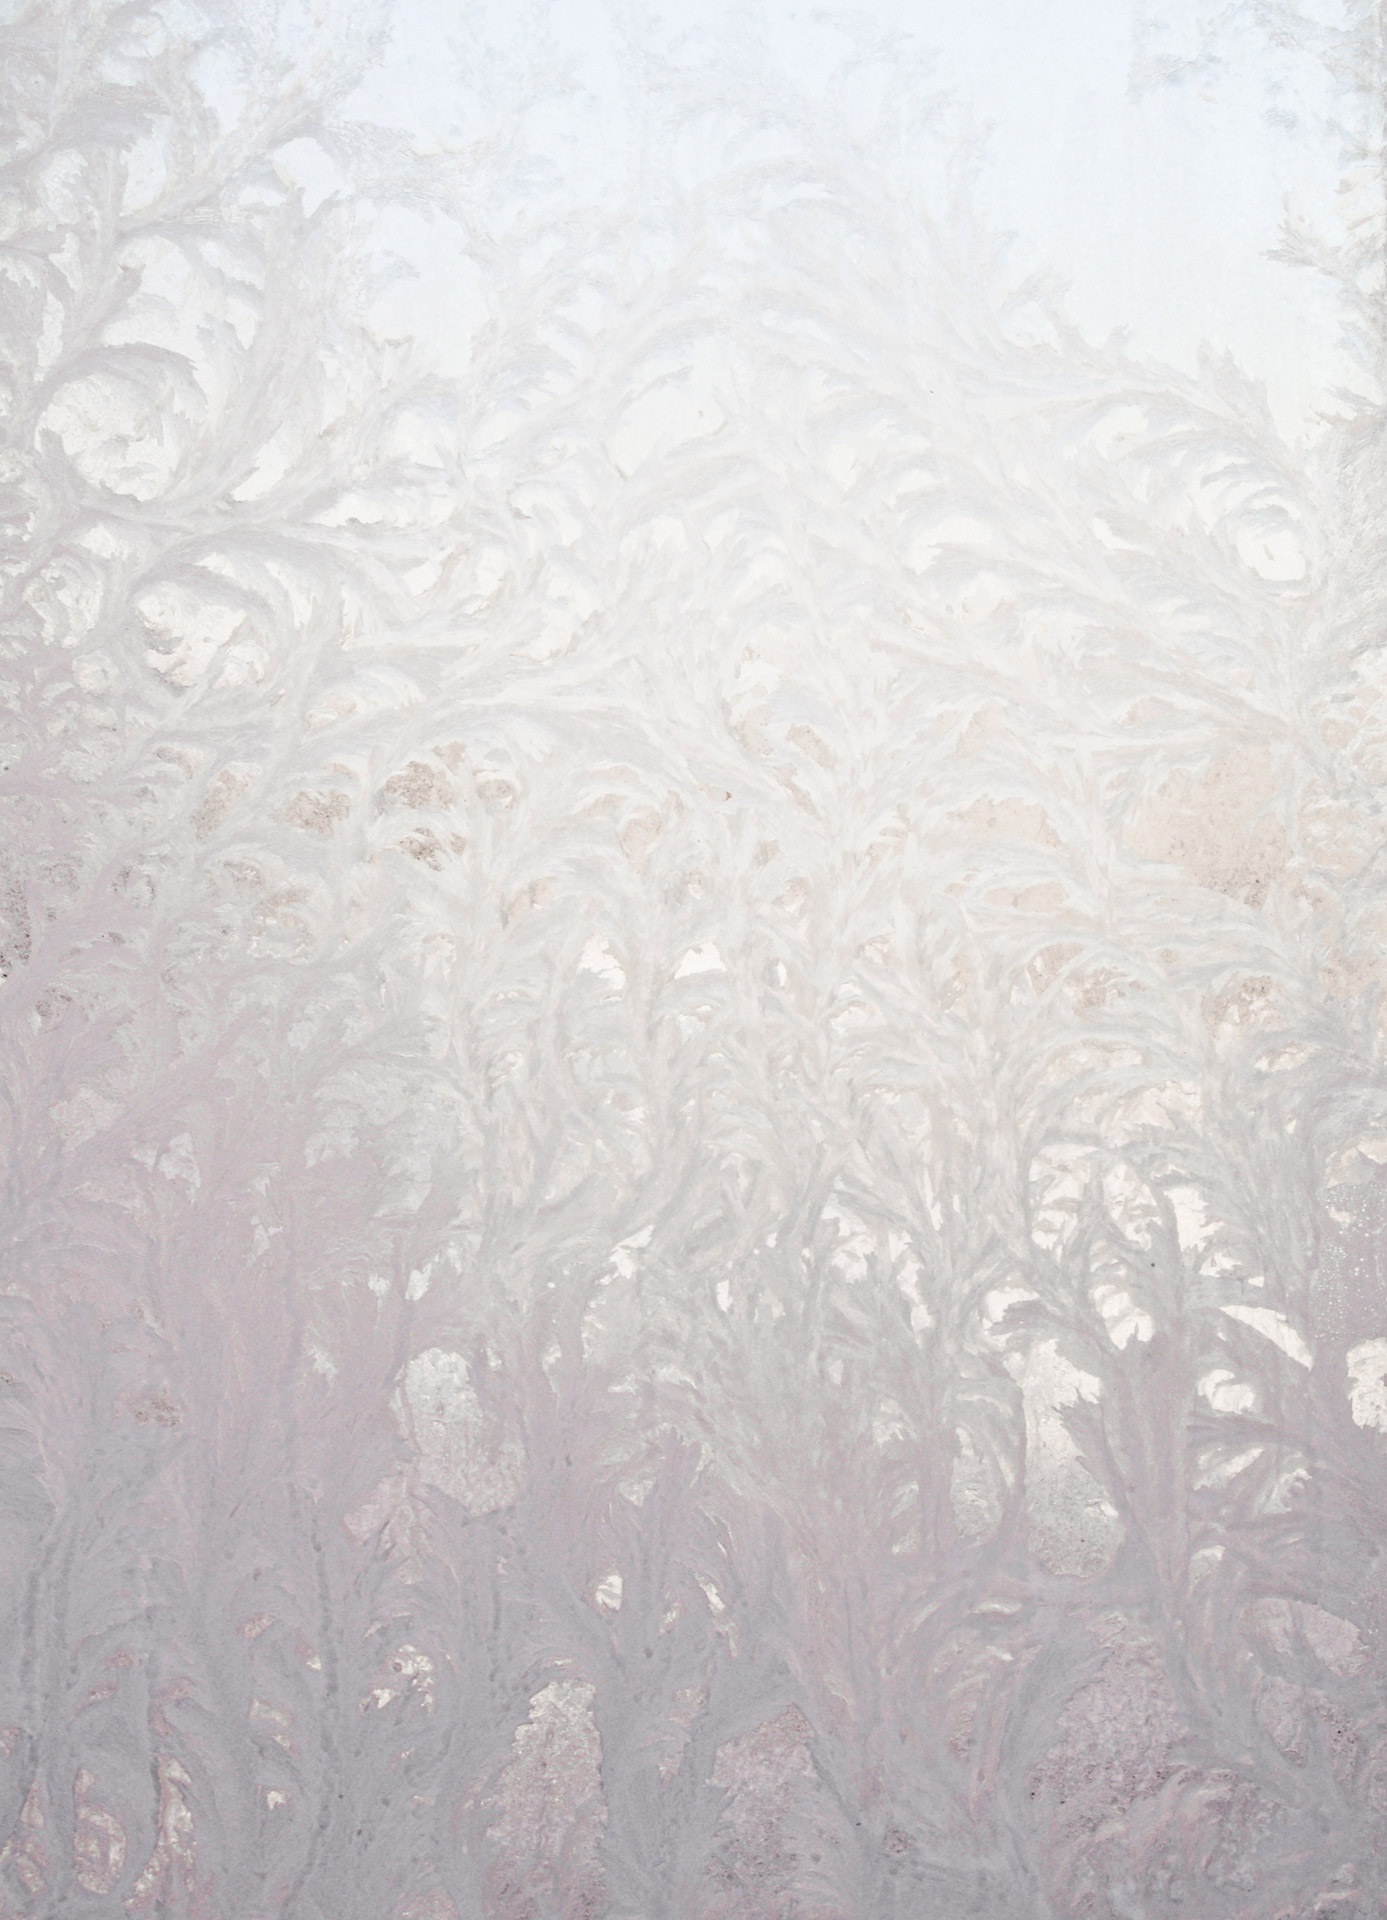 rime frost patterns free photo